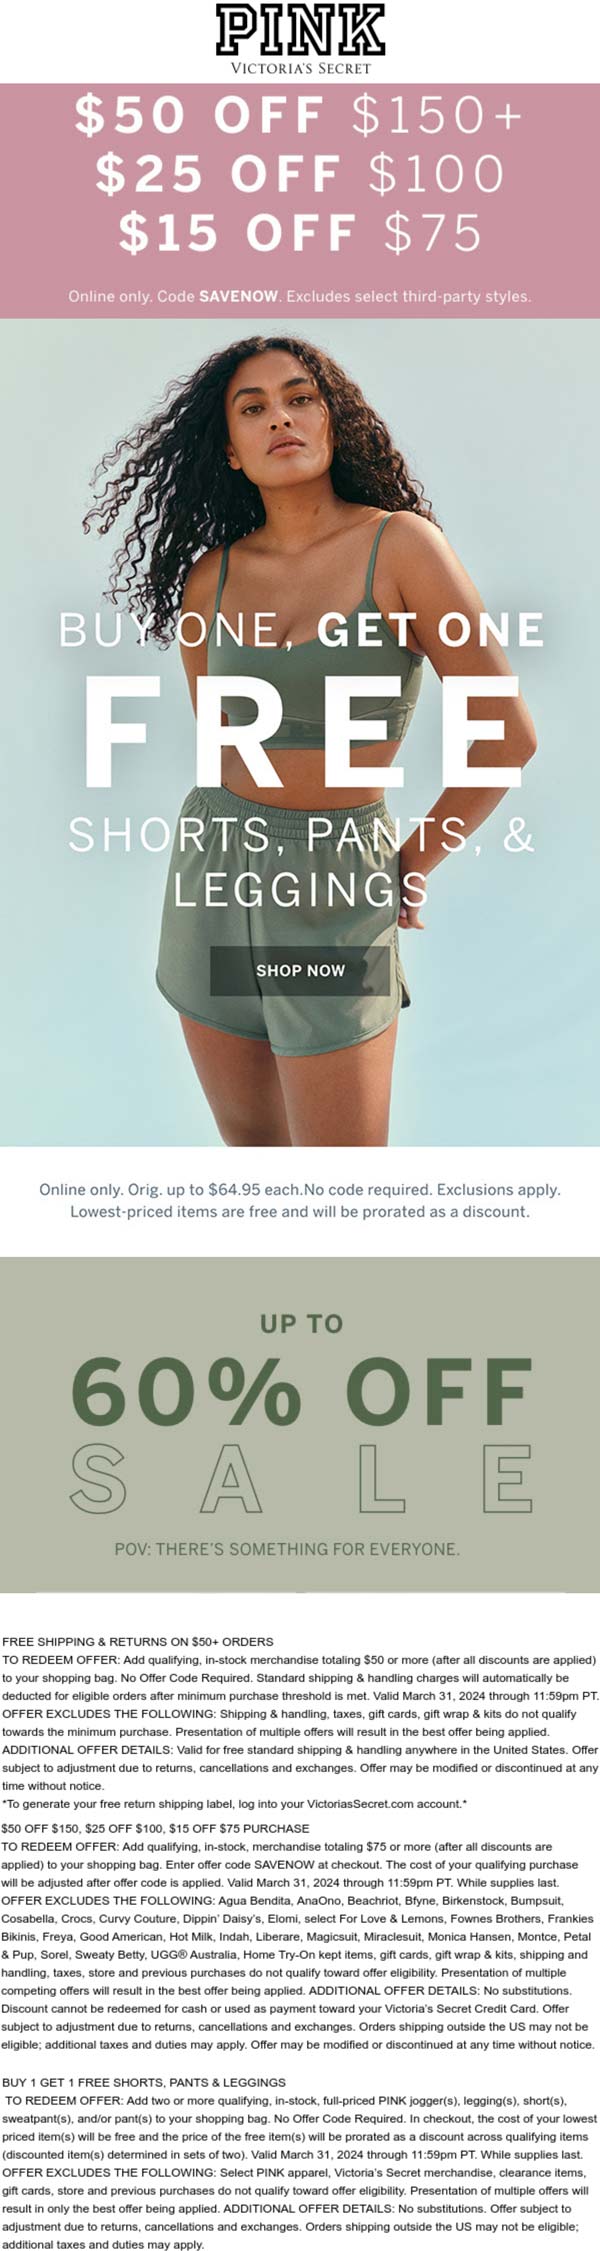 PINK stores Coupon  $15-$50 off $75+ today at PINK via promo code SAVENOW #pink 